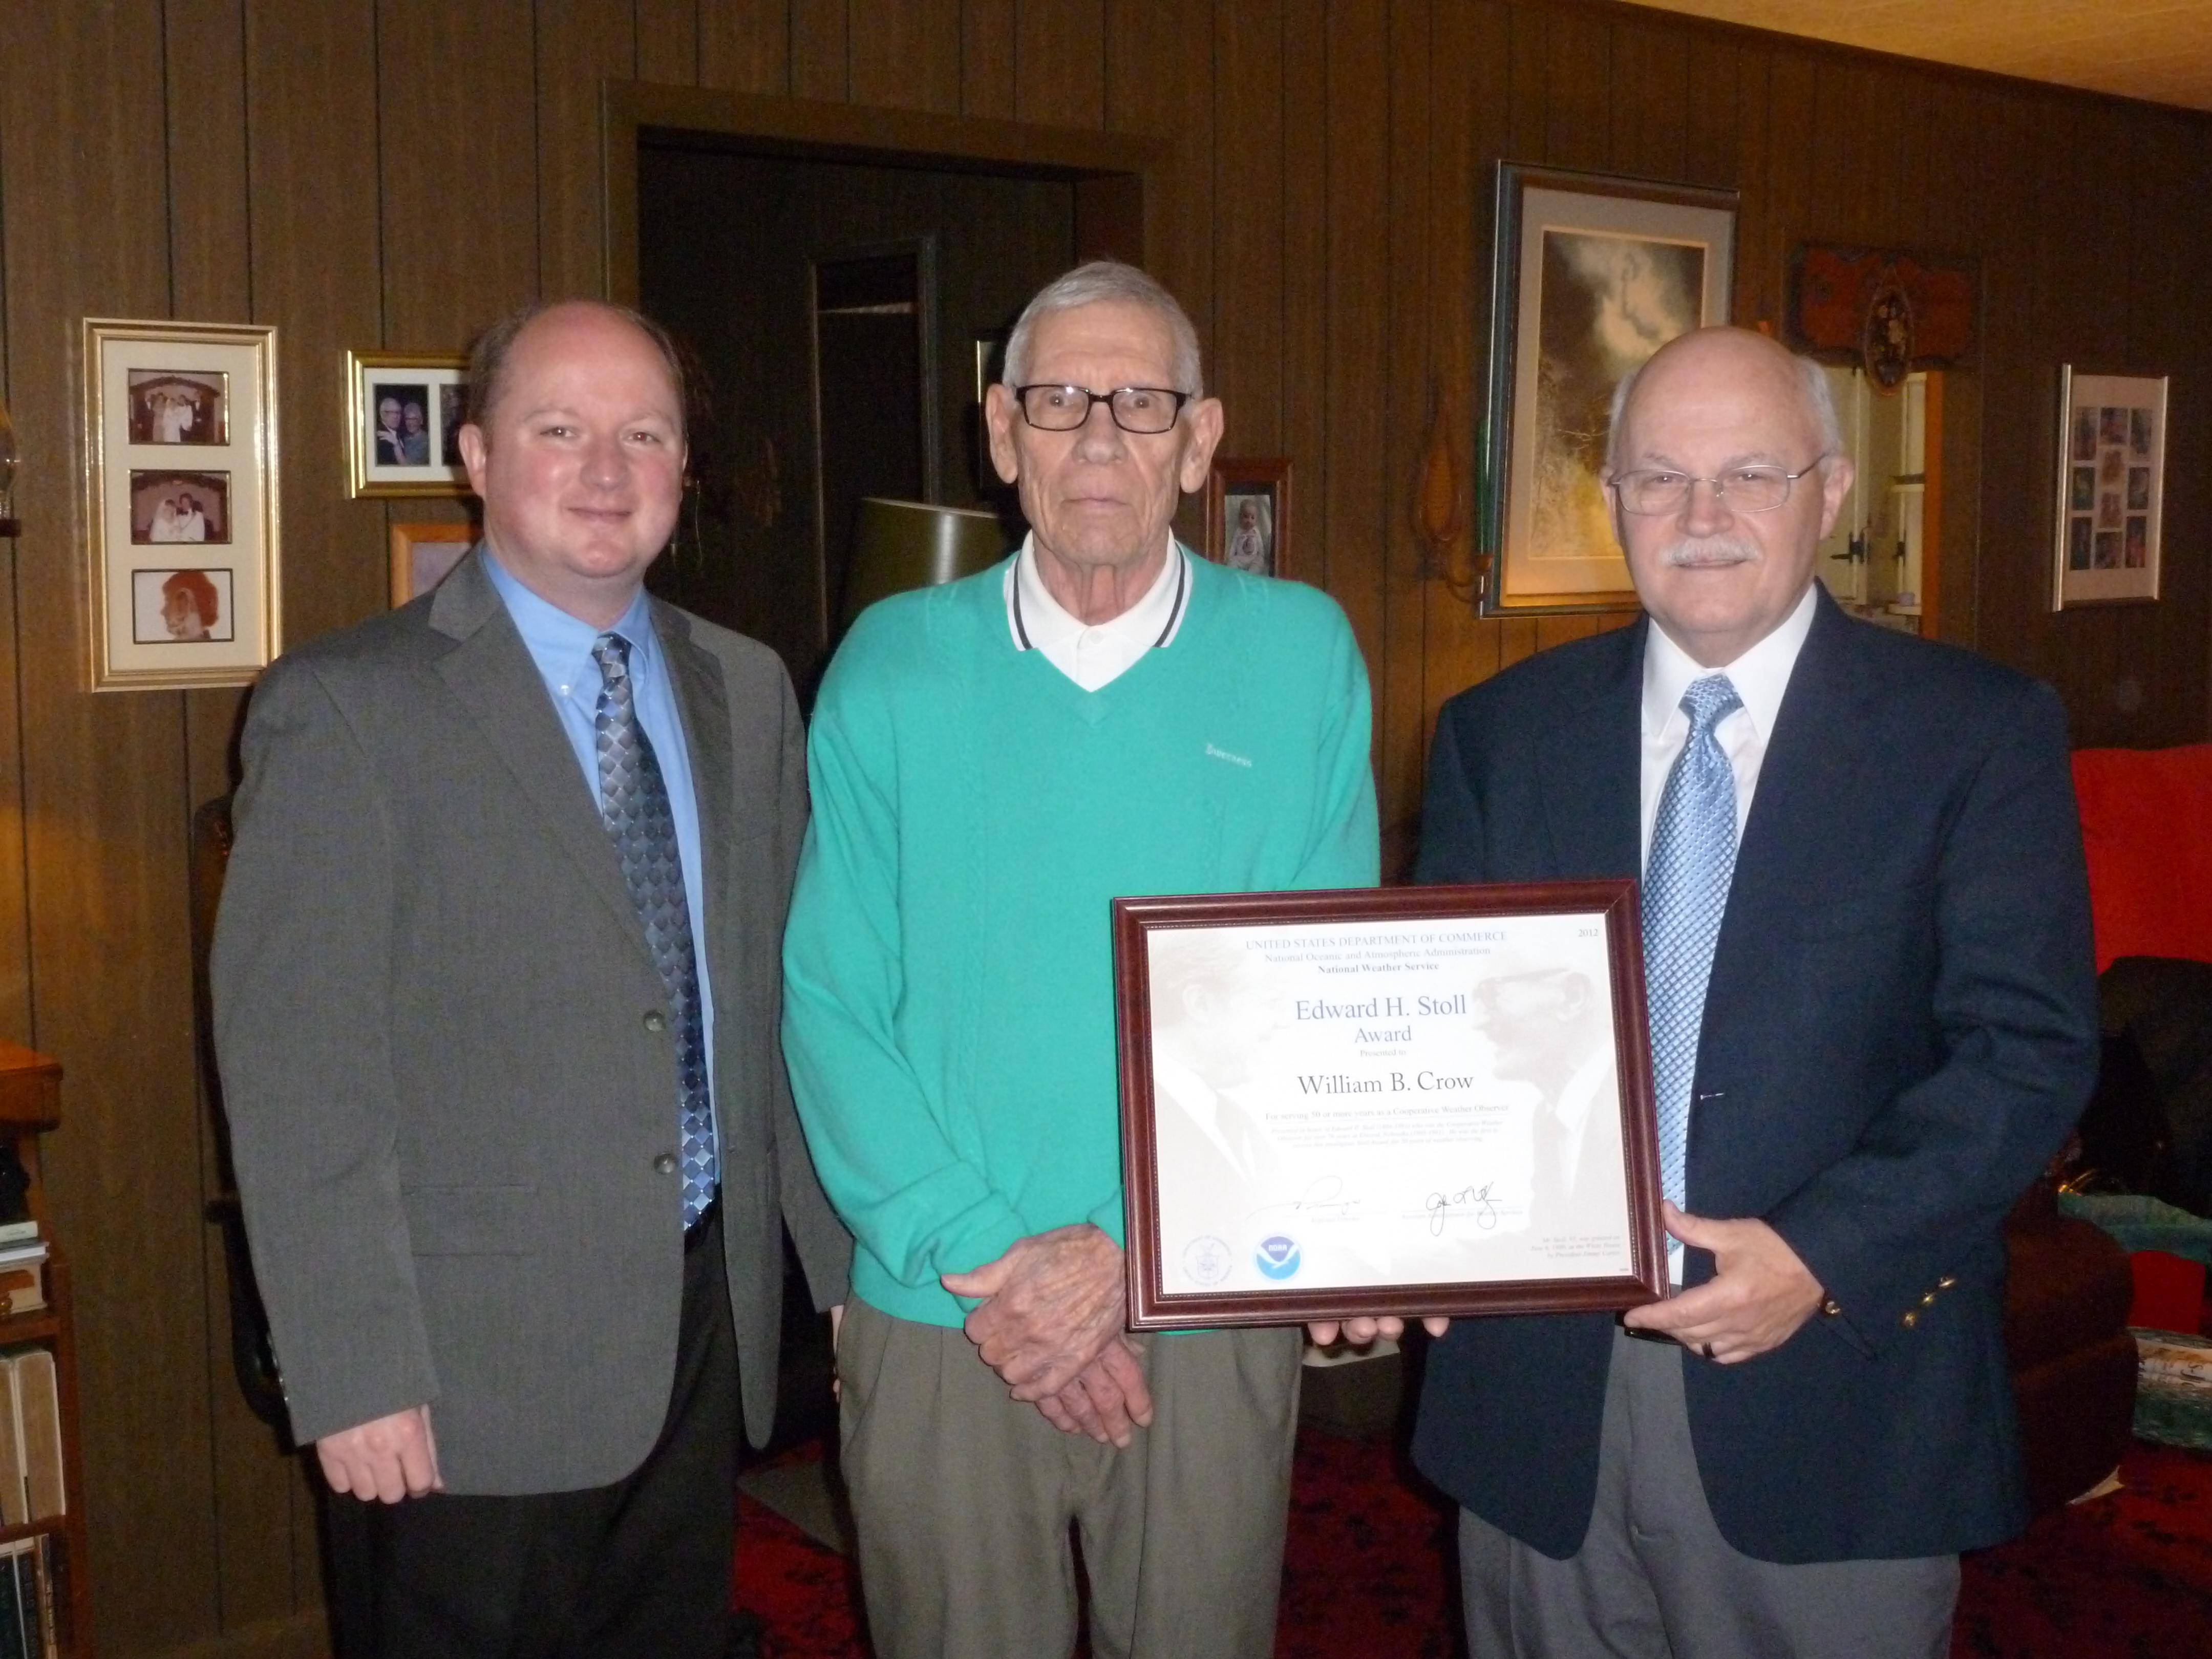 Meteorologist Chris Darden and Observer Program Leader Lary Burgett present Mr. Crow with the Edward H. Stoll Award for 50 years of service